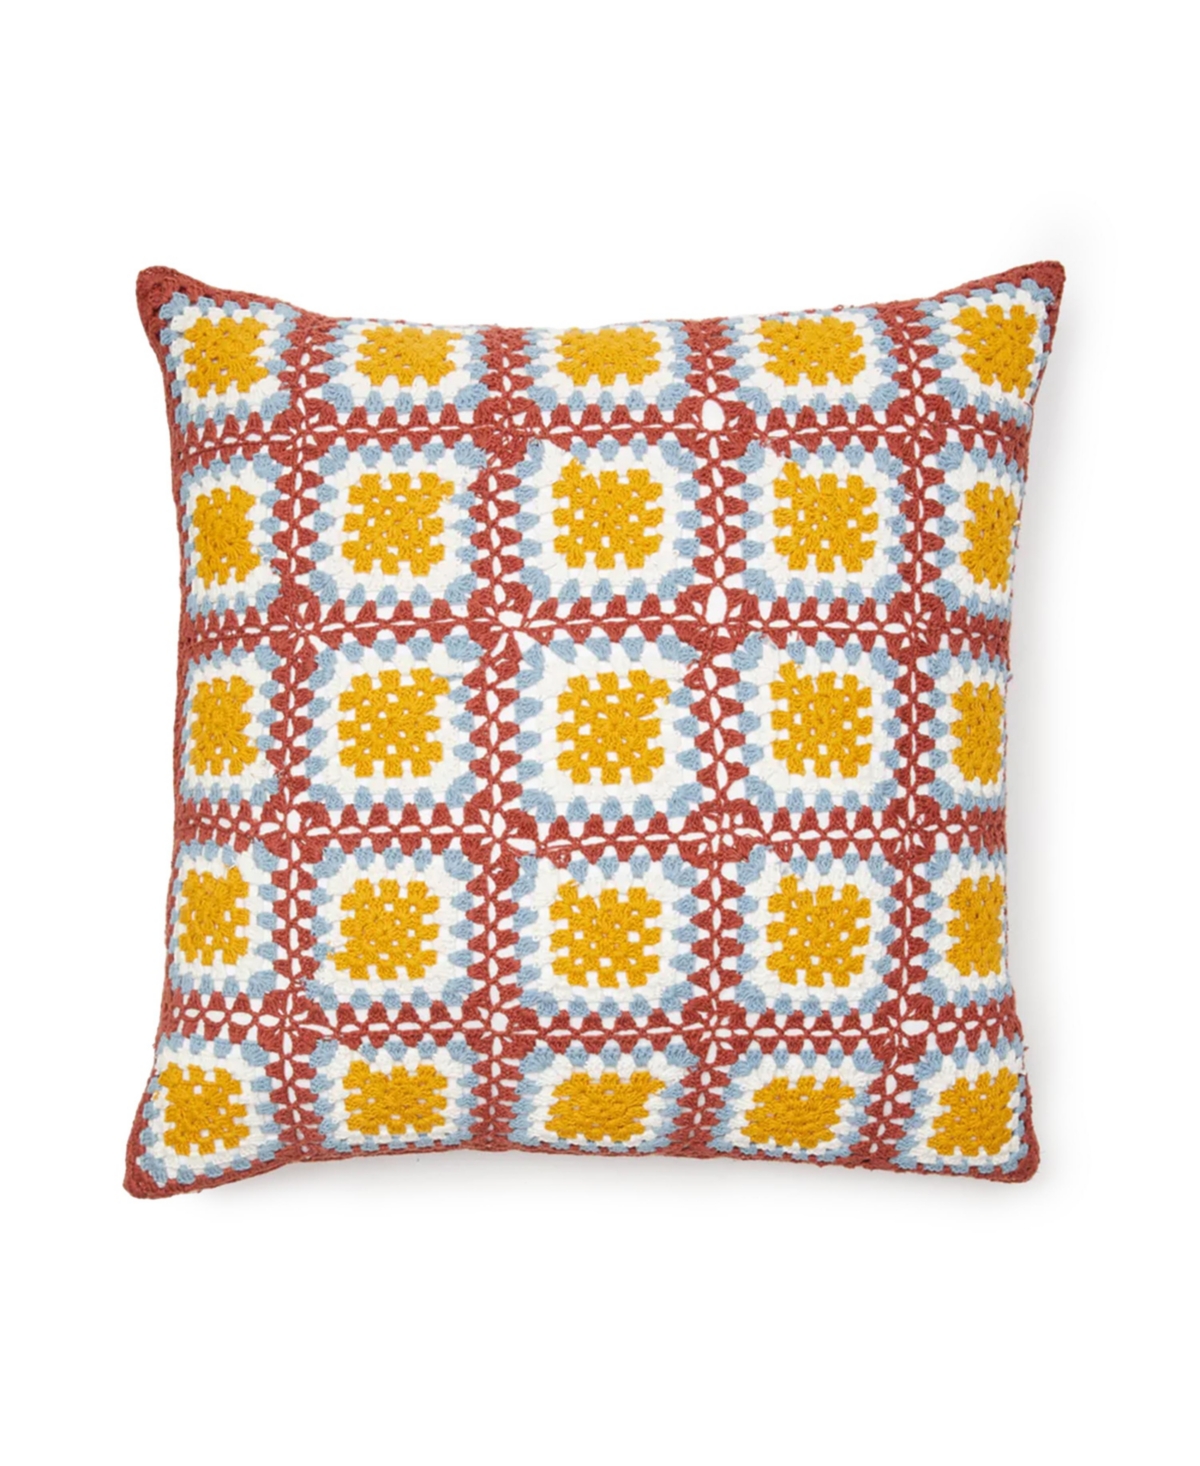 Dormify June Crochet Square Pillow, 20" X 20", Ultra-cute Styles To Personalize Your Room In June Mustard